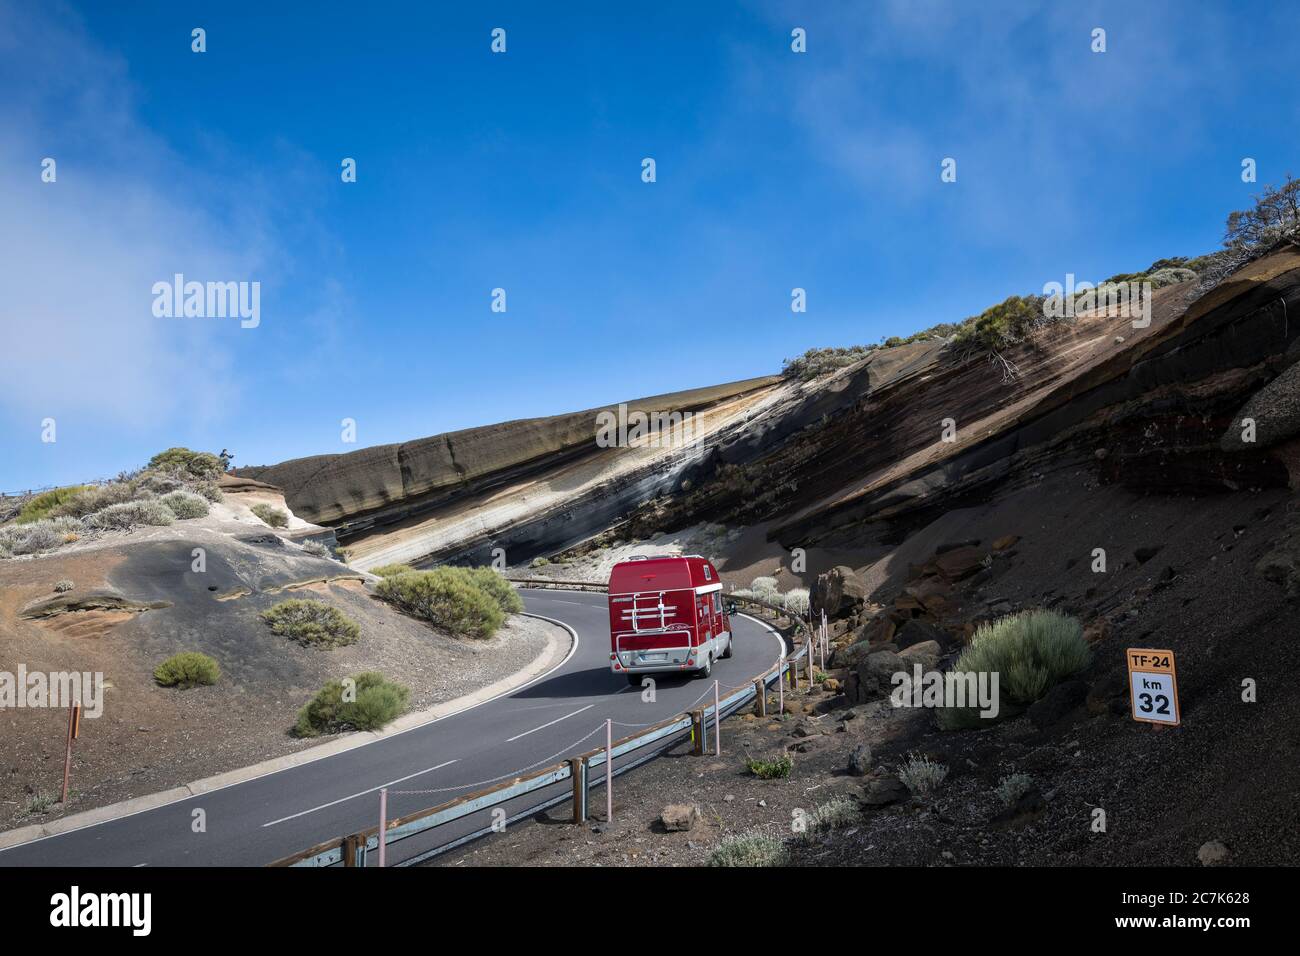 La Tarta del Teide on the TF-24 road, geological formation of different volcanic ash layers in the El Teide National Park, UNESCO World Heritage, Tenerife, Canary Islands, Spain Stock Photo